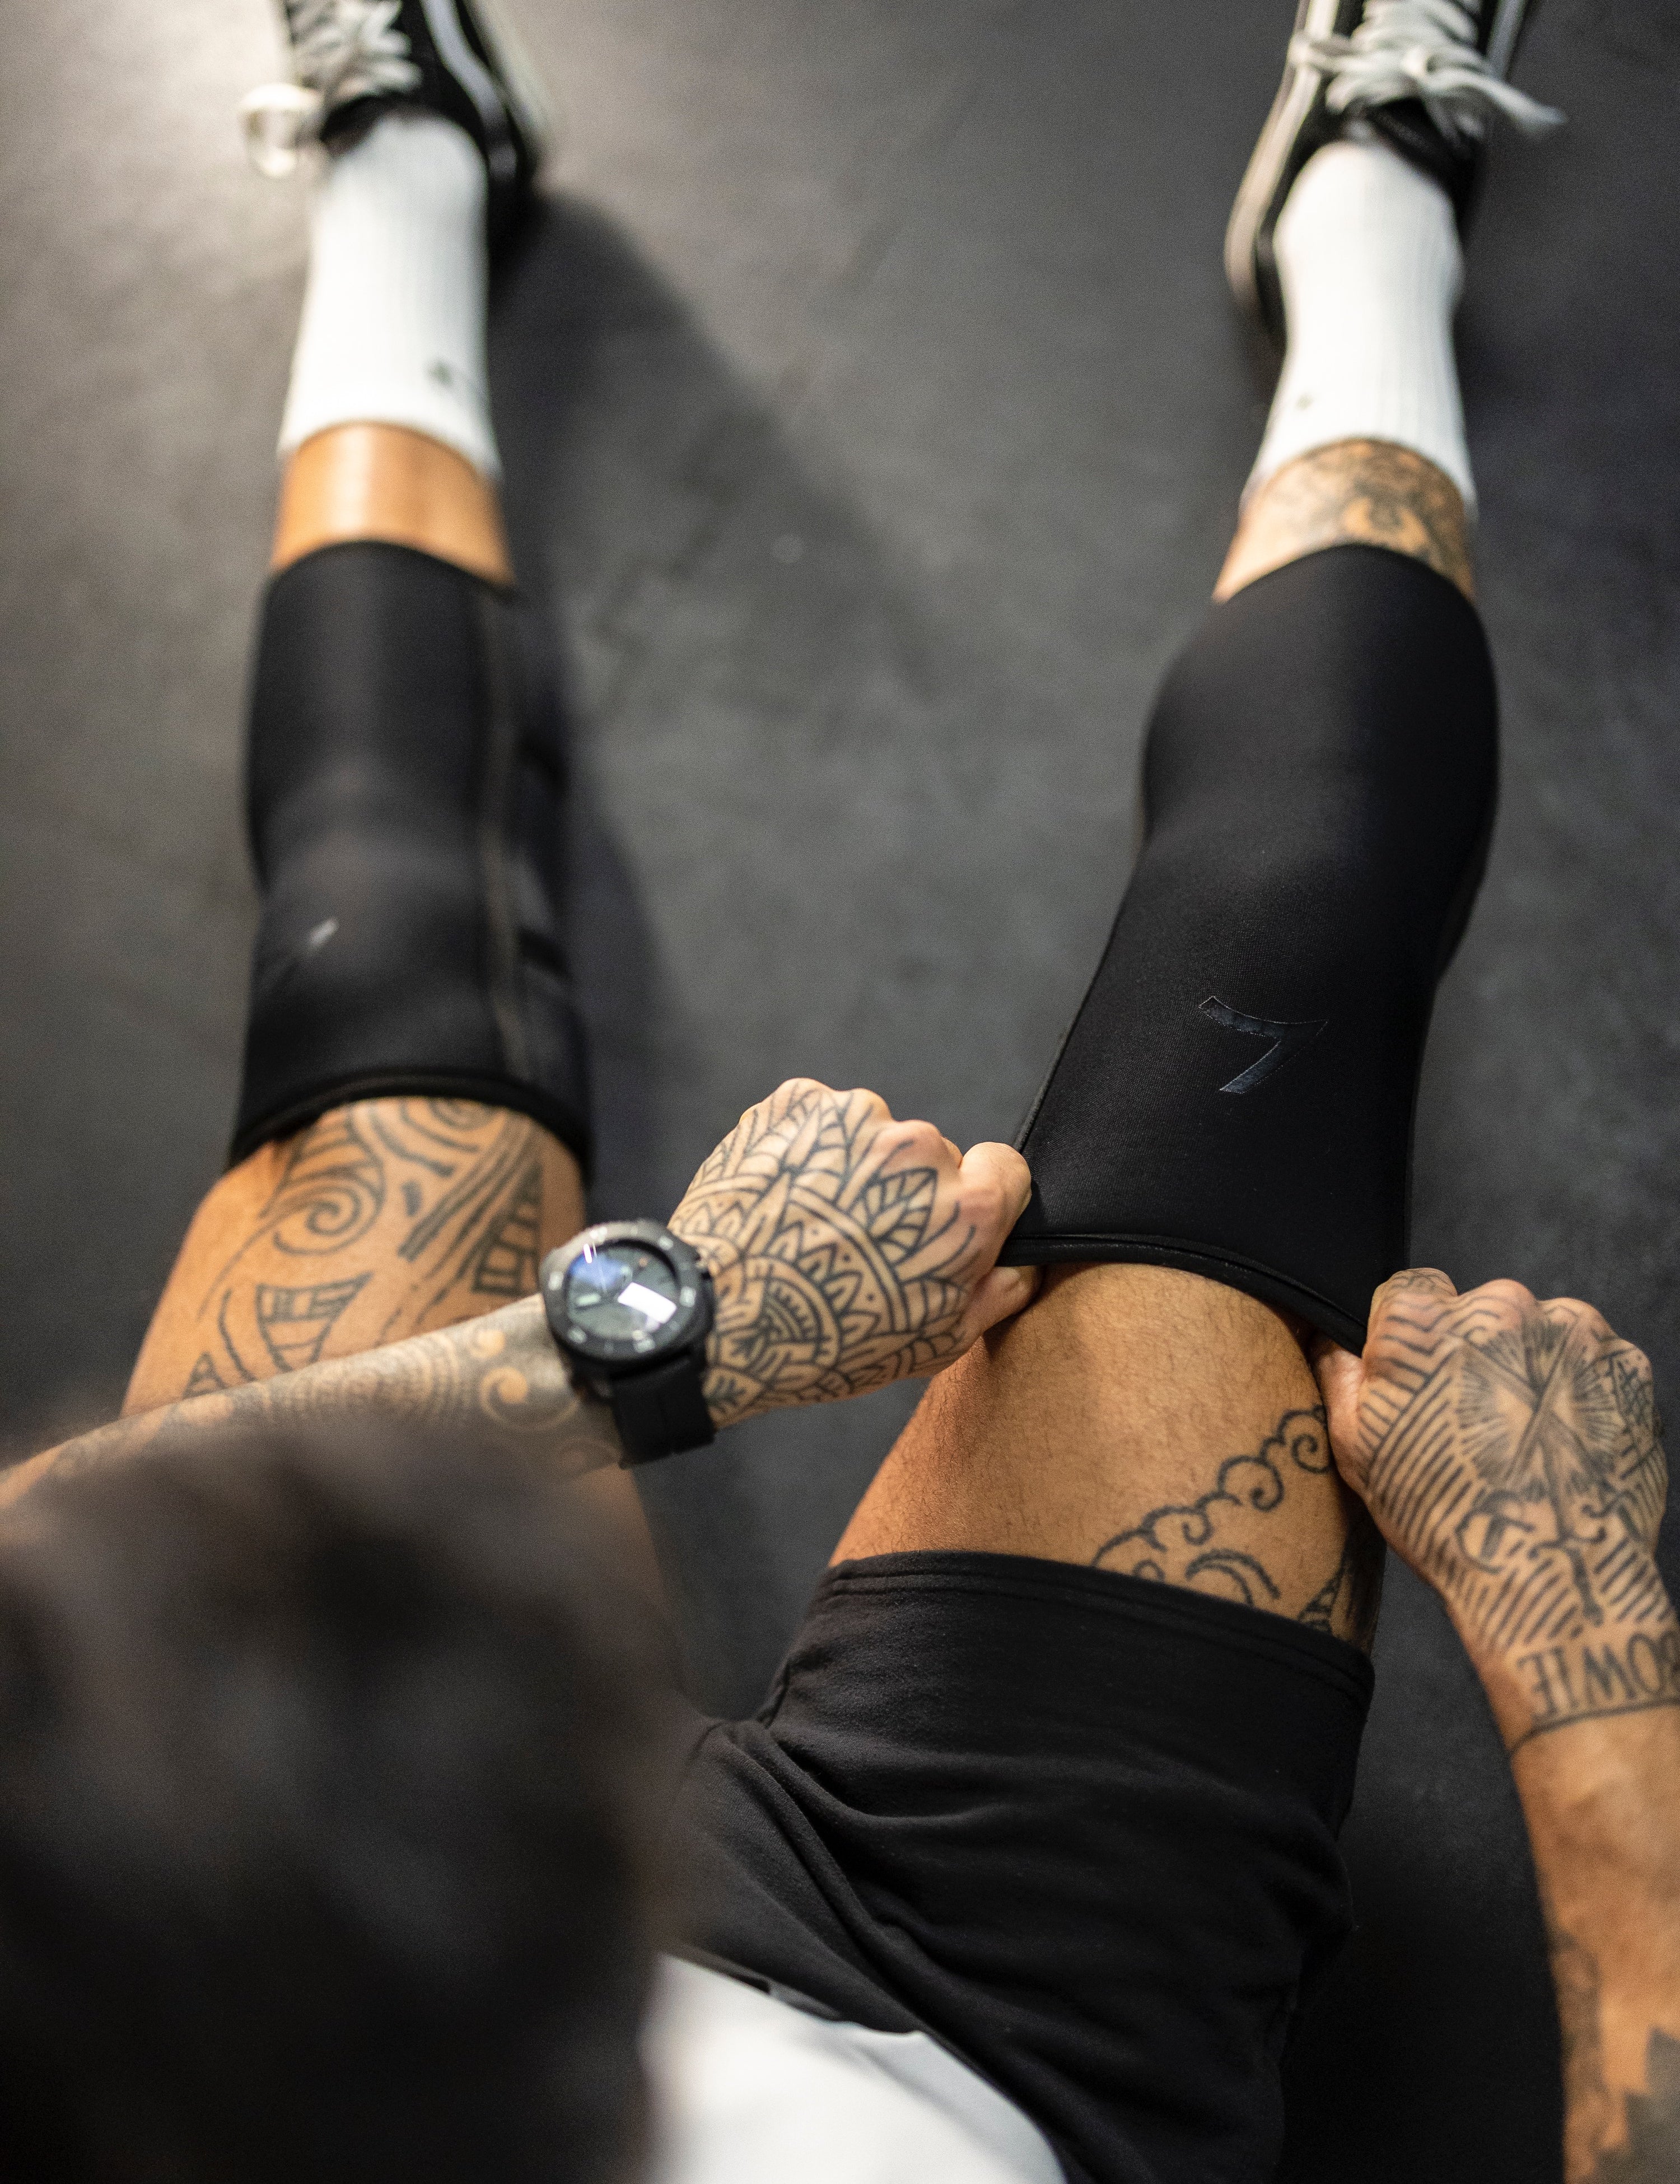 When do you need Knee sleeves for lifting?